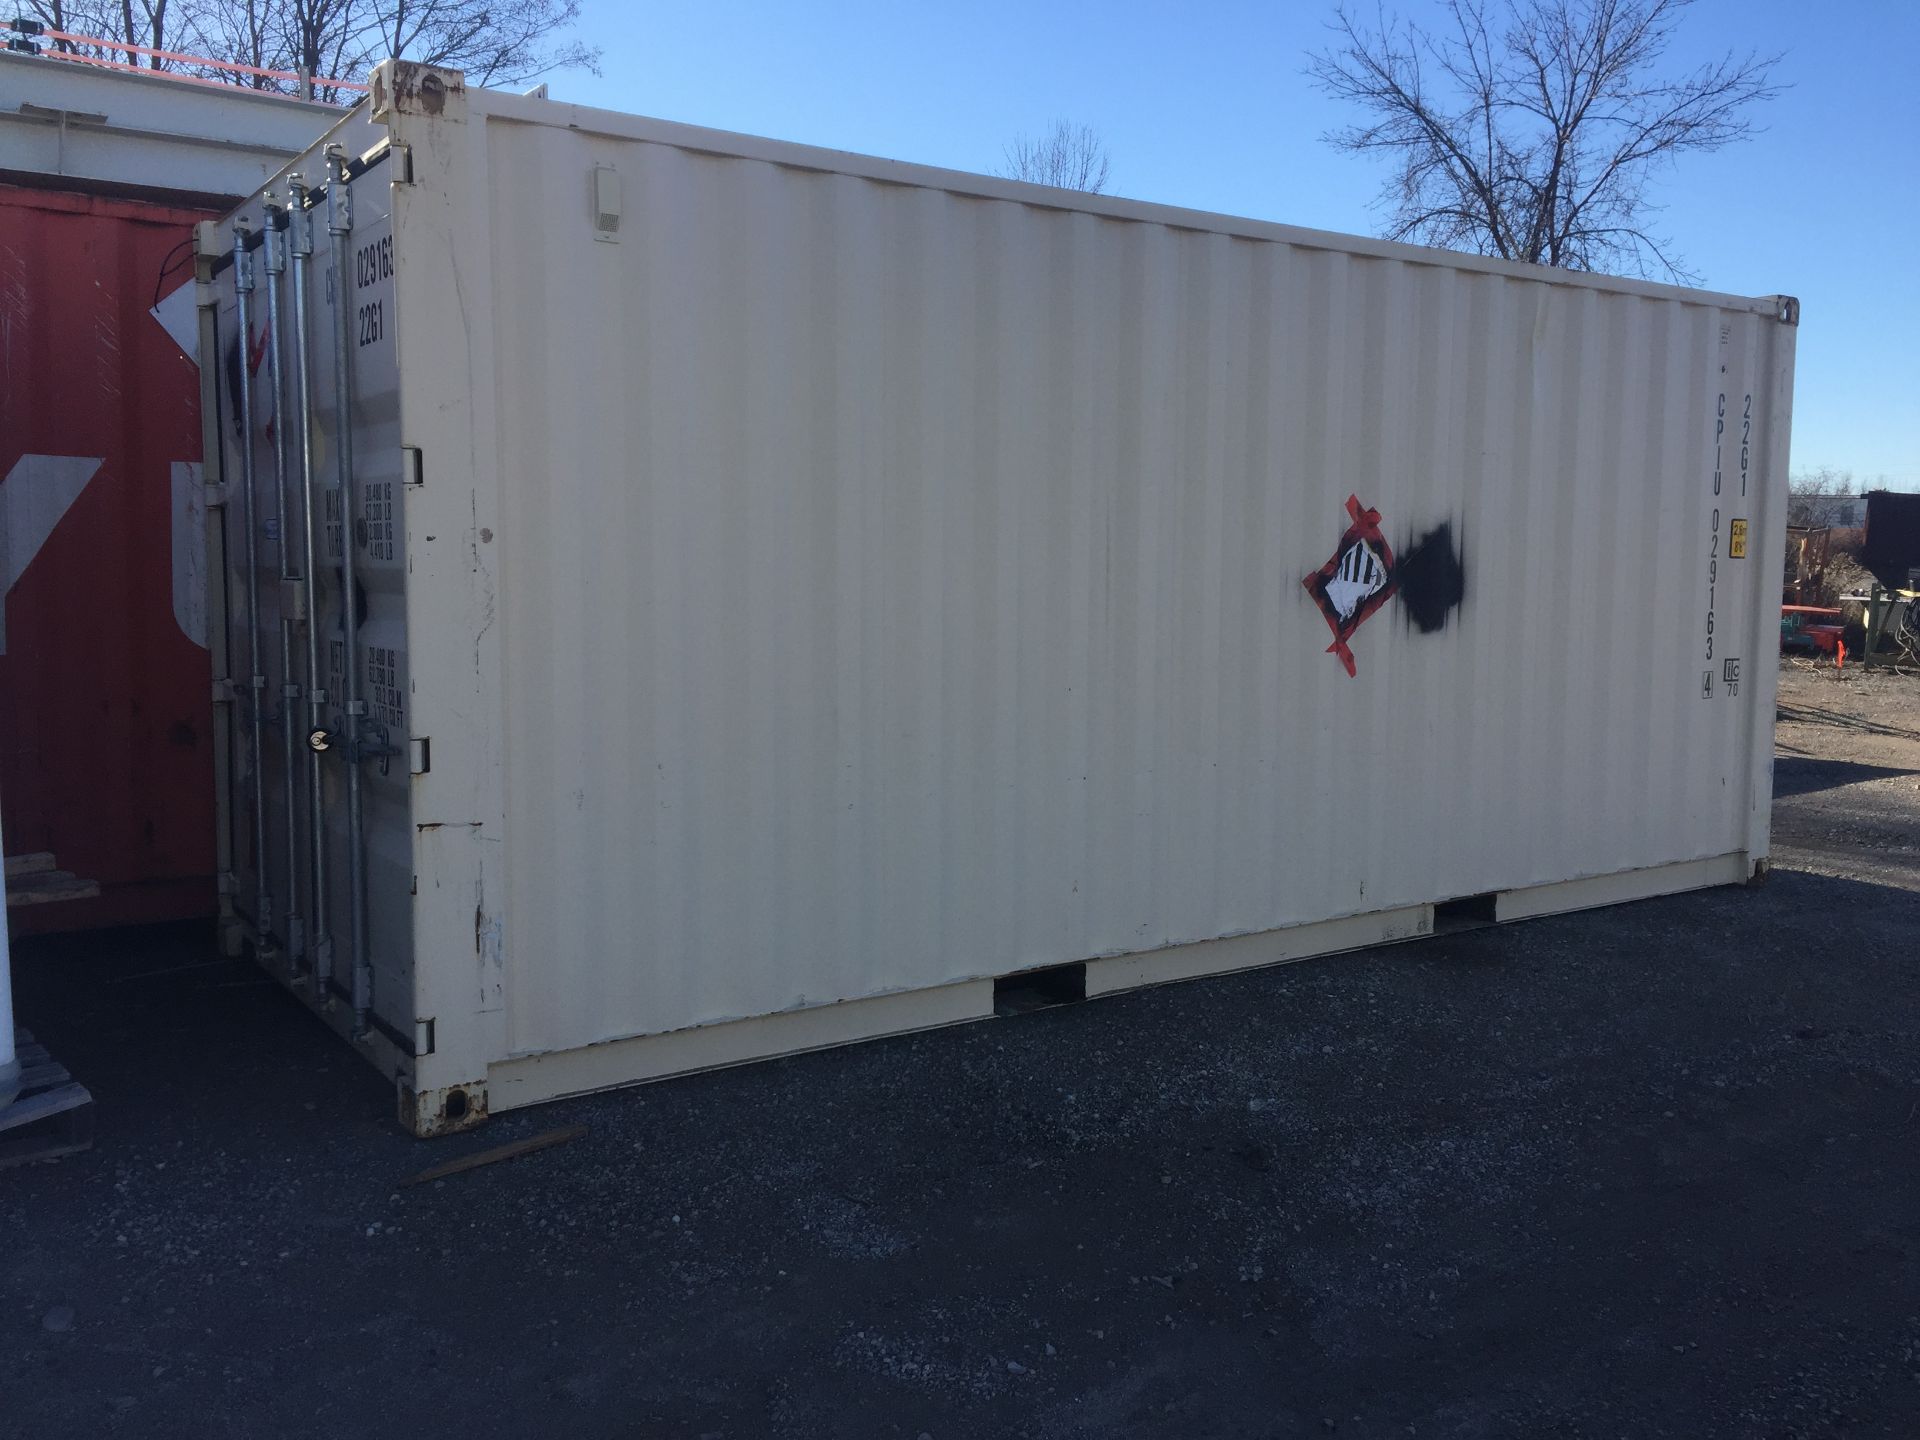 WHITE 20ft SEA CONTAINER - FREE LOADING WITH FORKLIFT